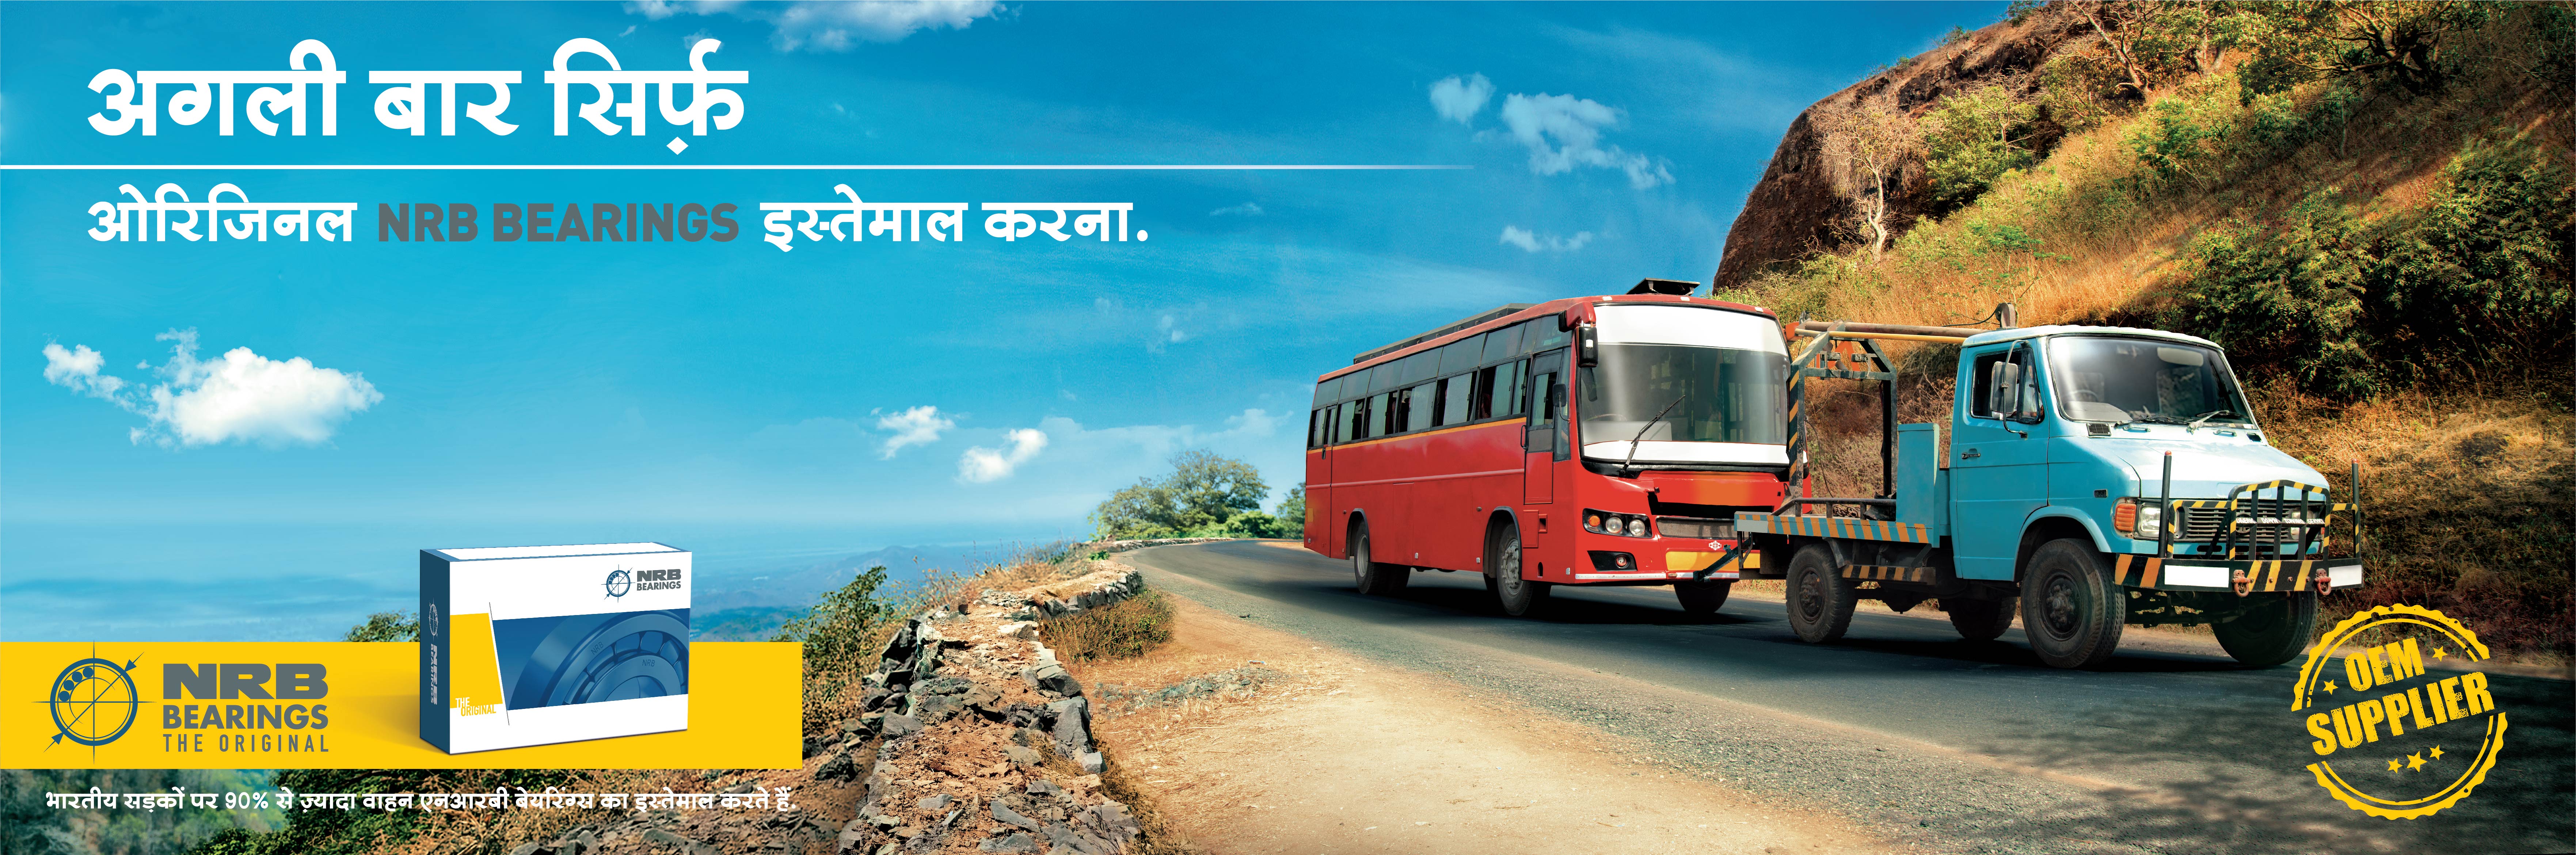 Bus being towed NRB Ad. shot by professional photographer